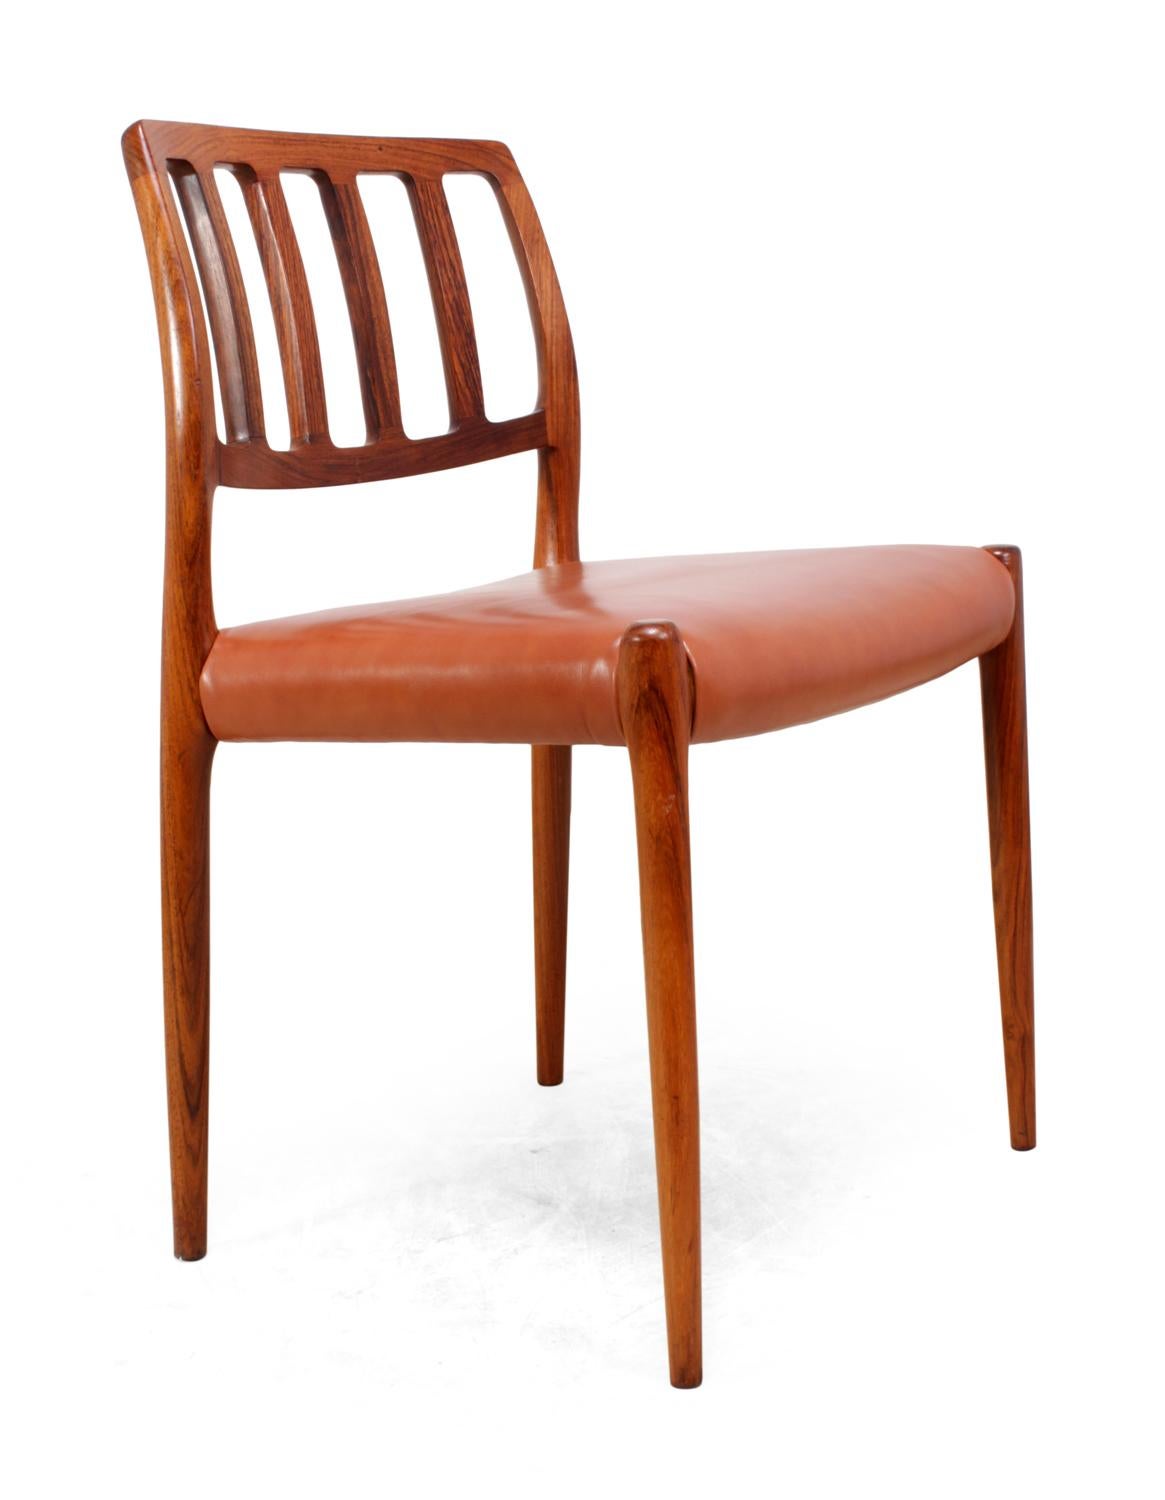 Danish Midcentury Rosewood Dining Chairs by Moller Model 83